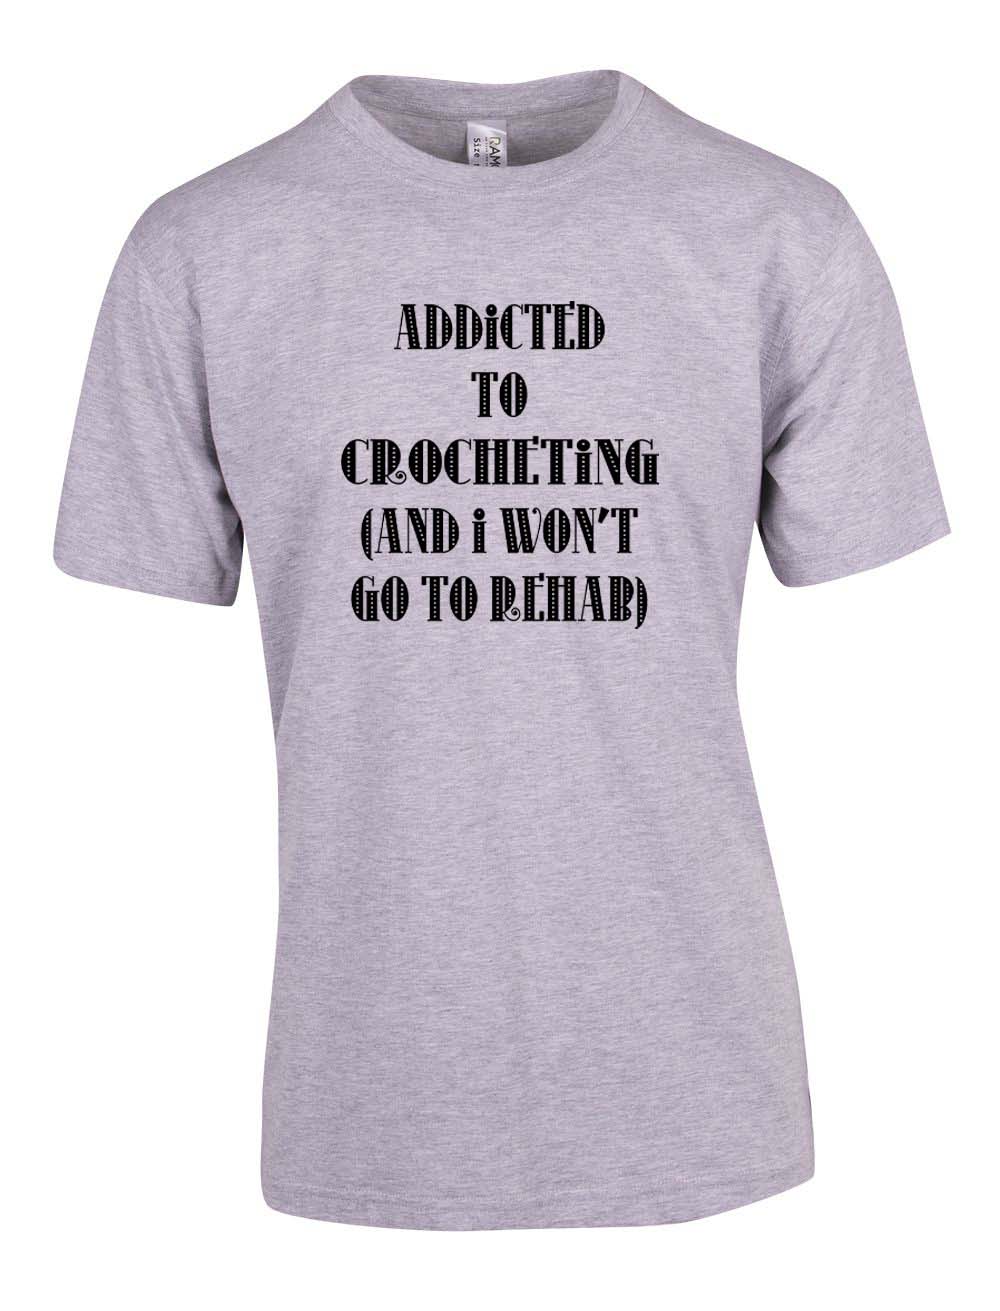 Addicted to Crocheting and I won't go to rehab T-Shirt